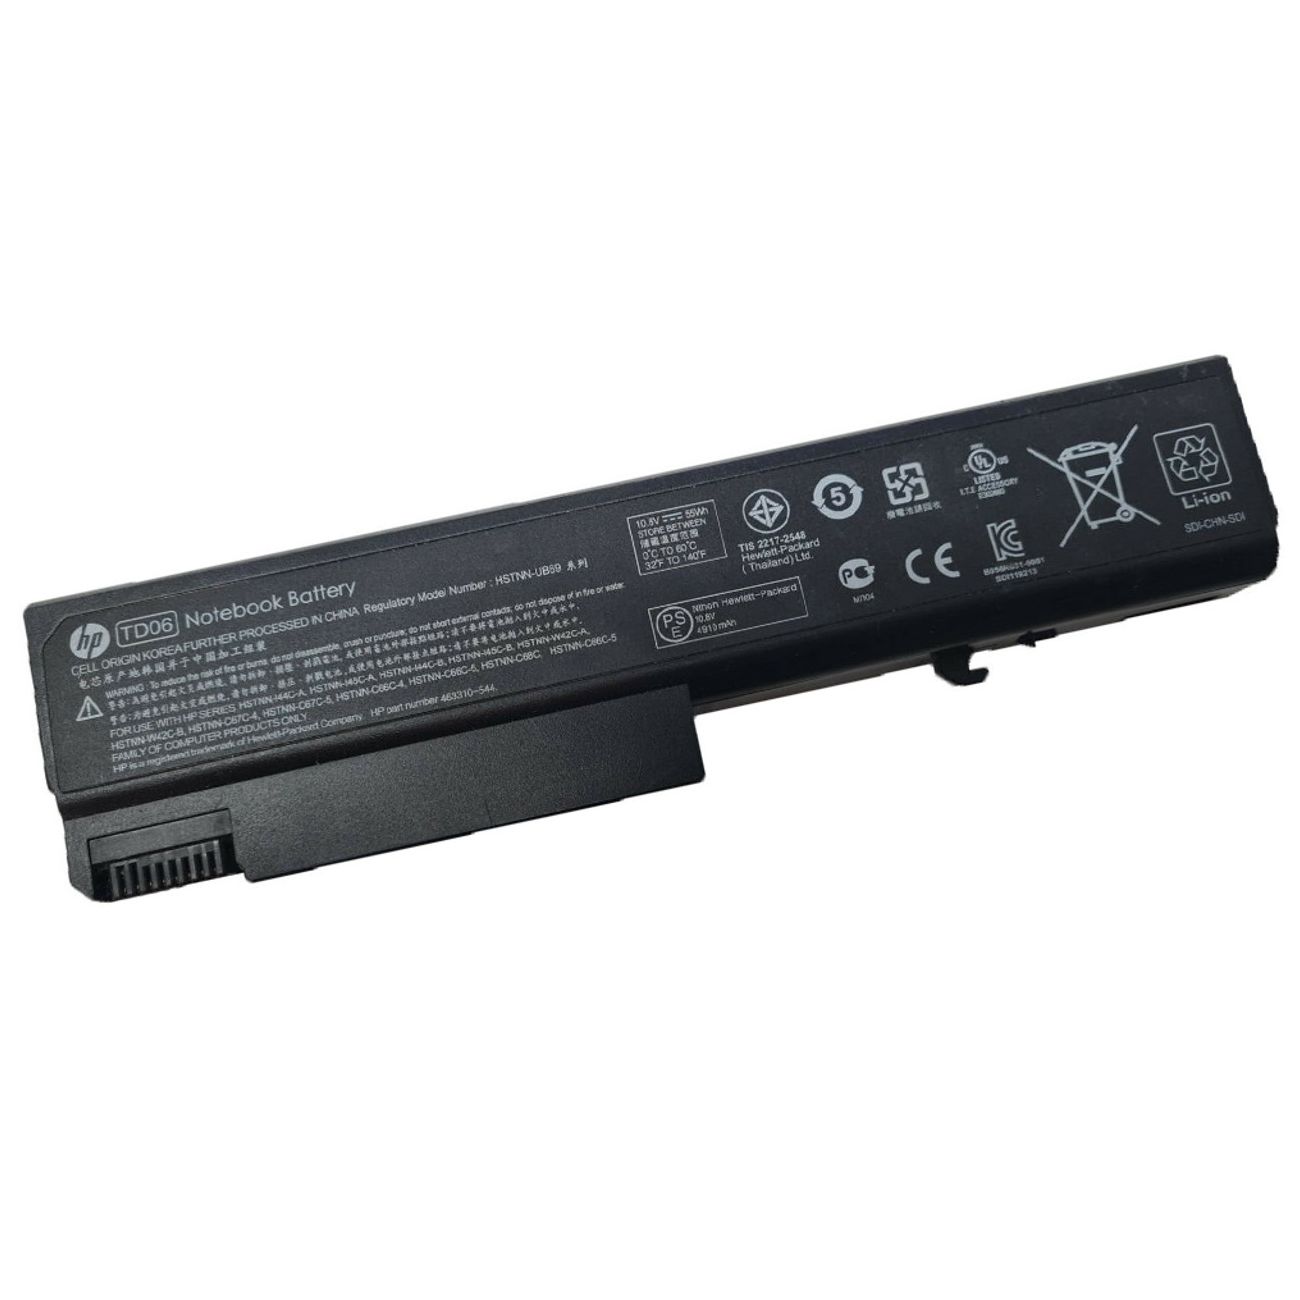 BATTERY FOR NOTEBOOK HP TD06/6530B COPY ,Laptop Battery